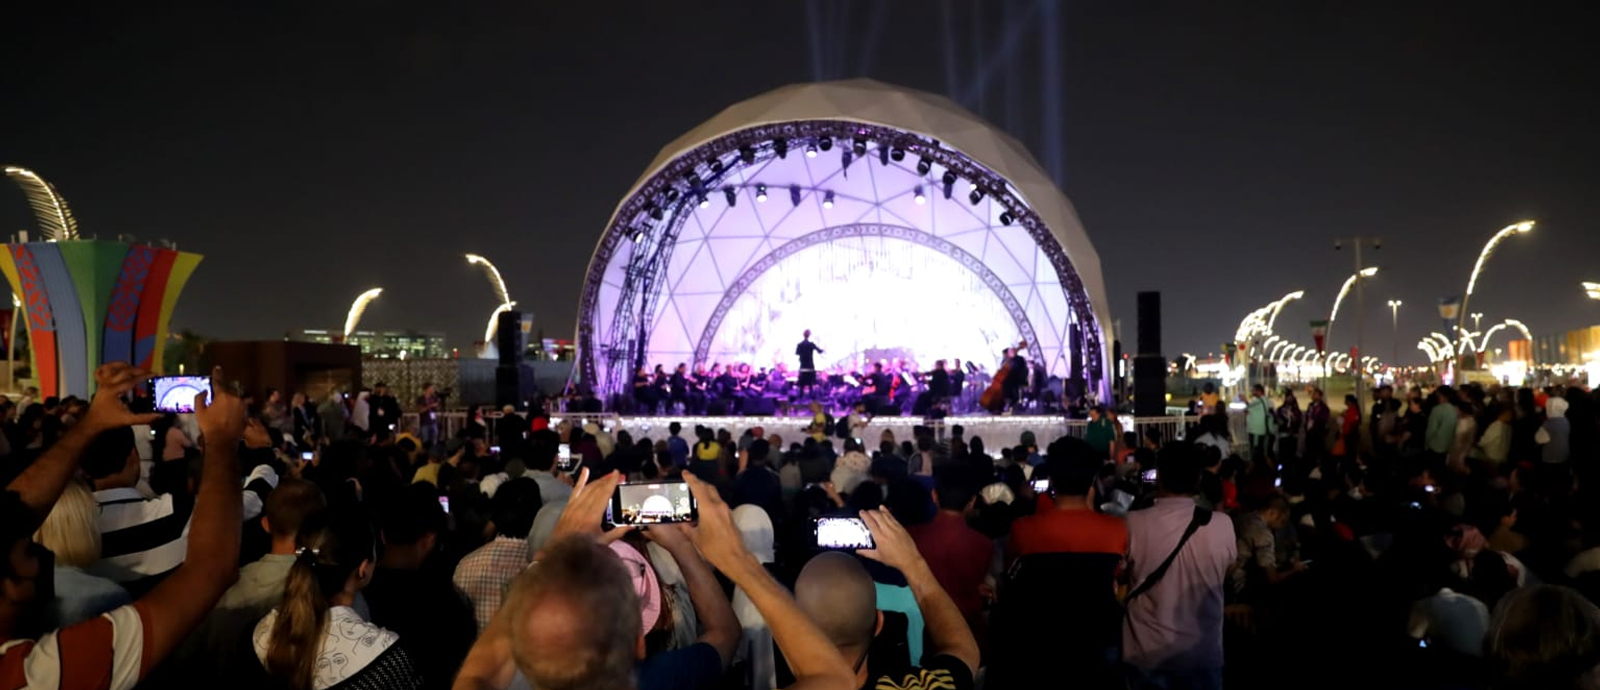 World Cup Fans Captivated as QPO Holds Football Music Performance